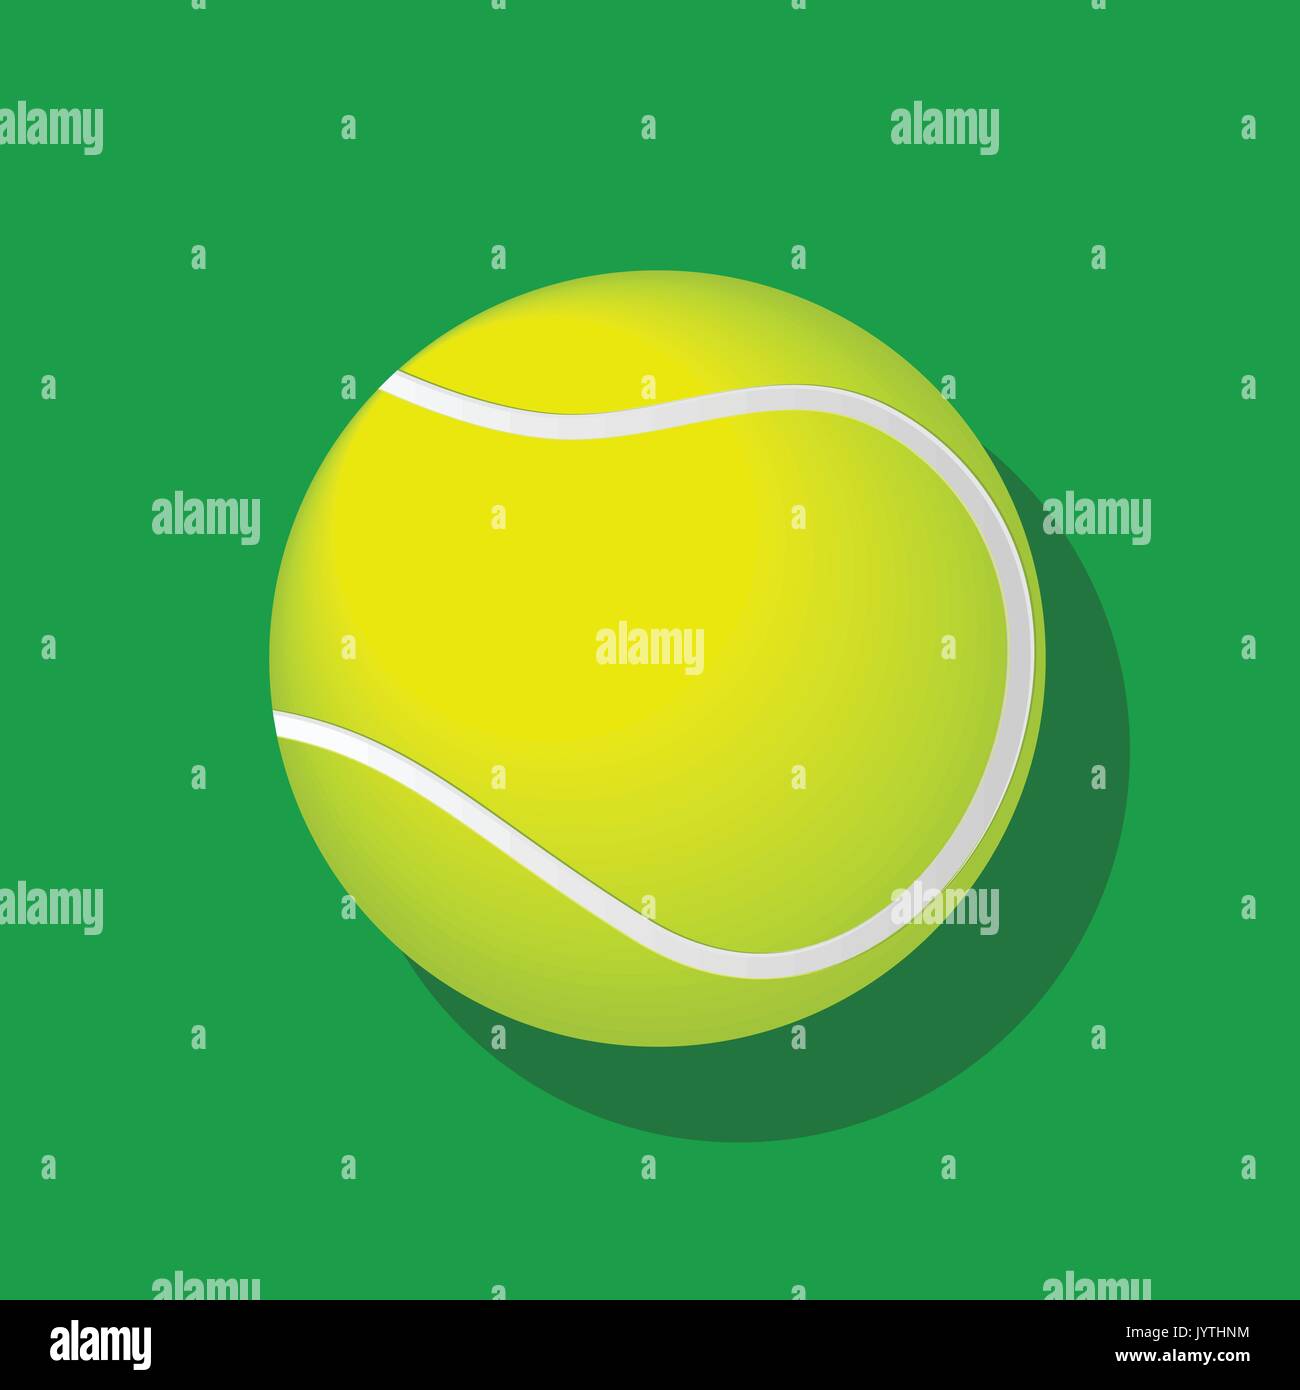 Tennis ball isolated with shadow on white background. Vector EPS10 illustration. Stock Vector